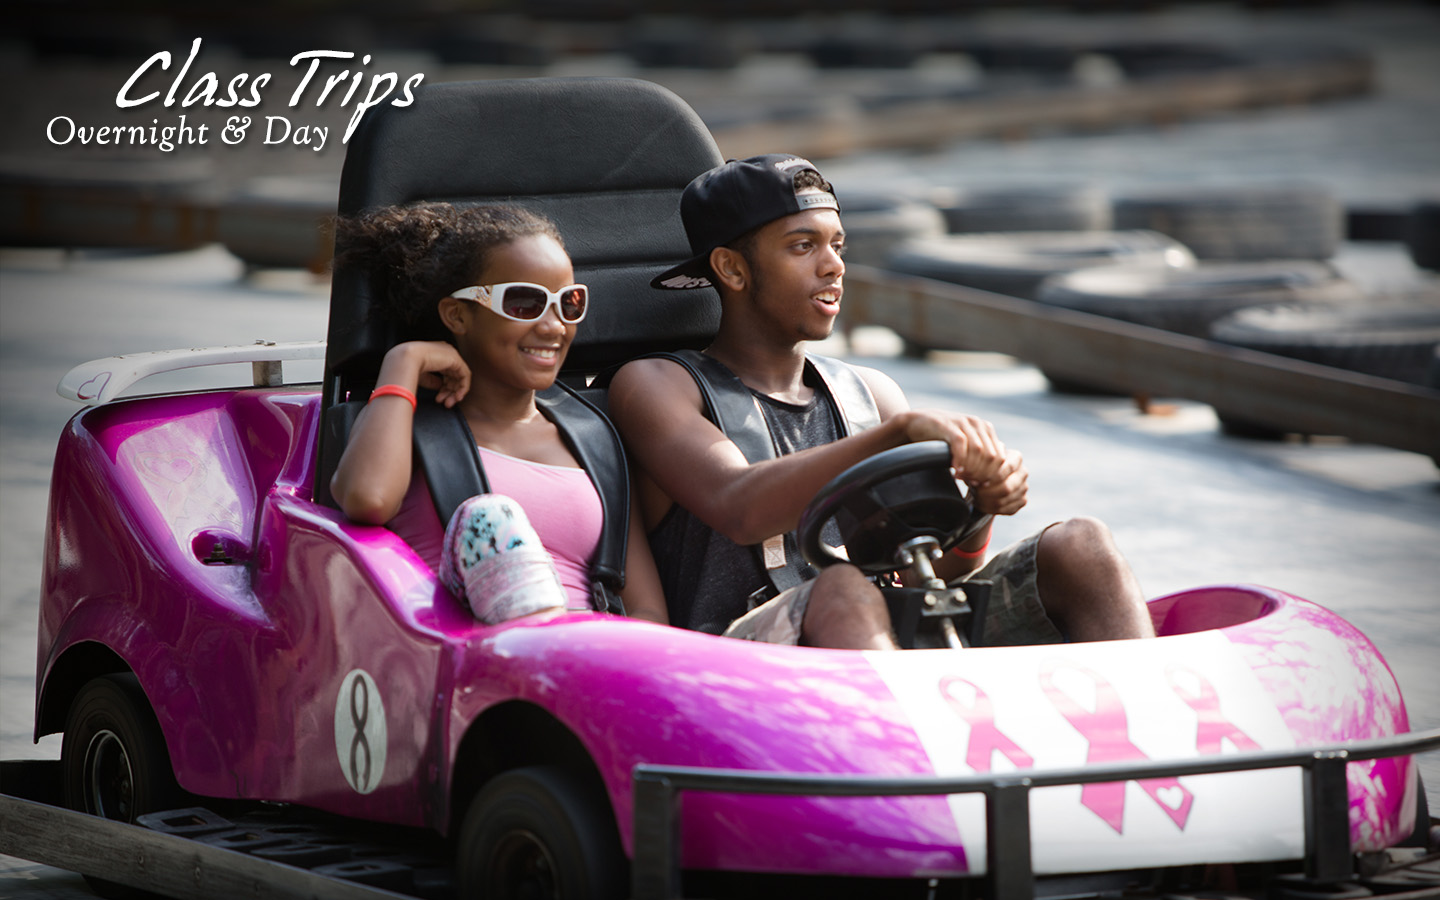 Young man and young woman in a gokart. Text: Class Trips, overnight and day.